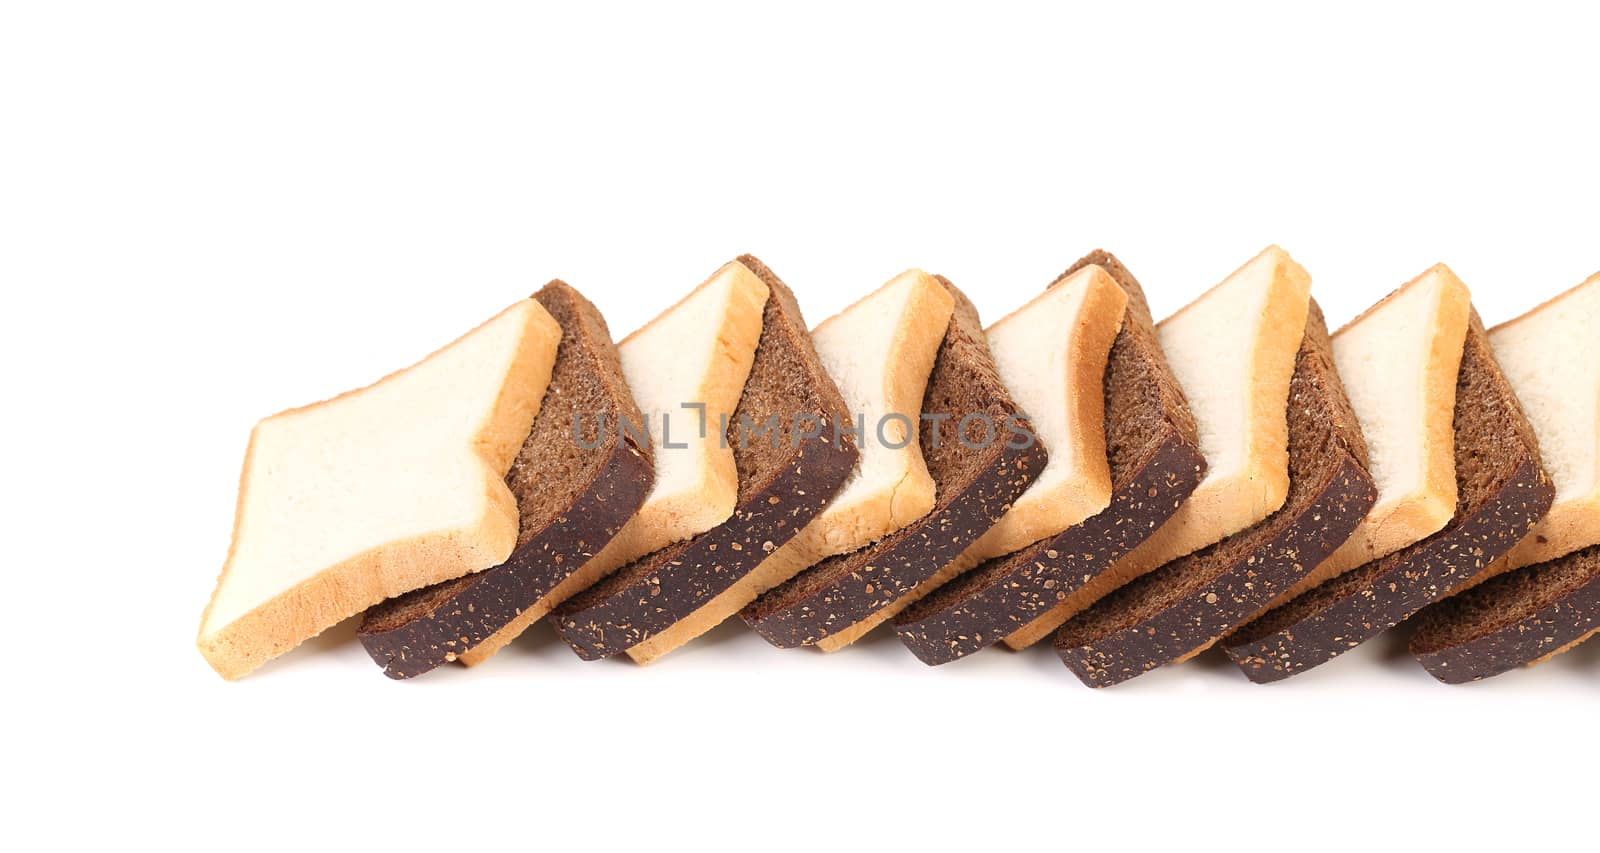 Row of sliced white and black bread. Isolated on a white background.